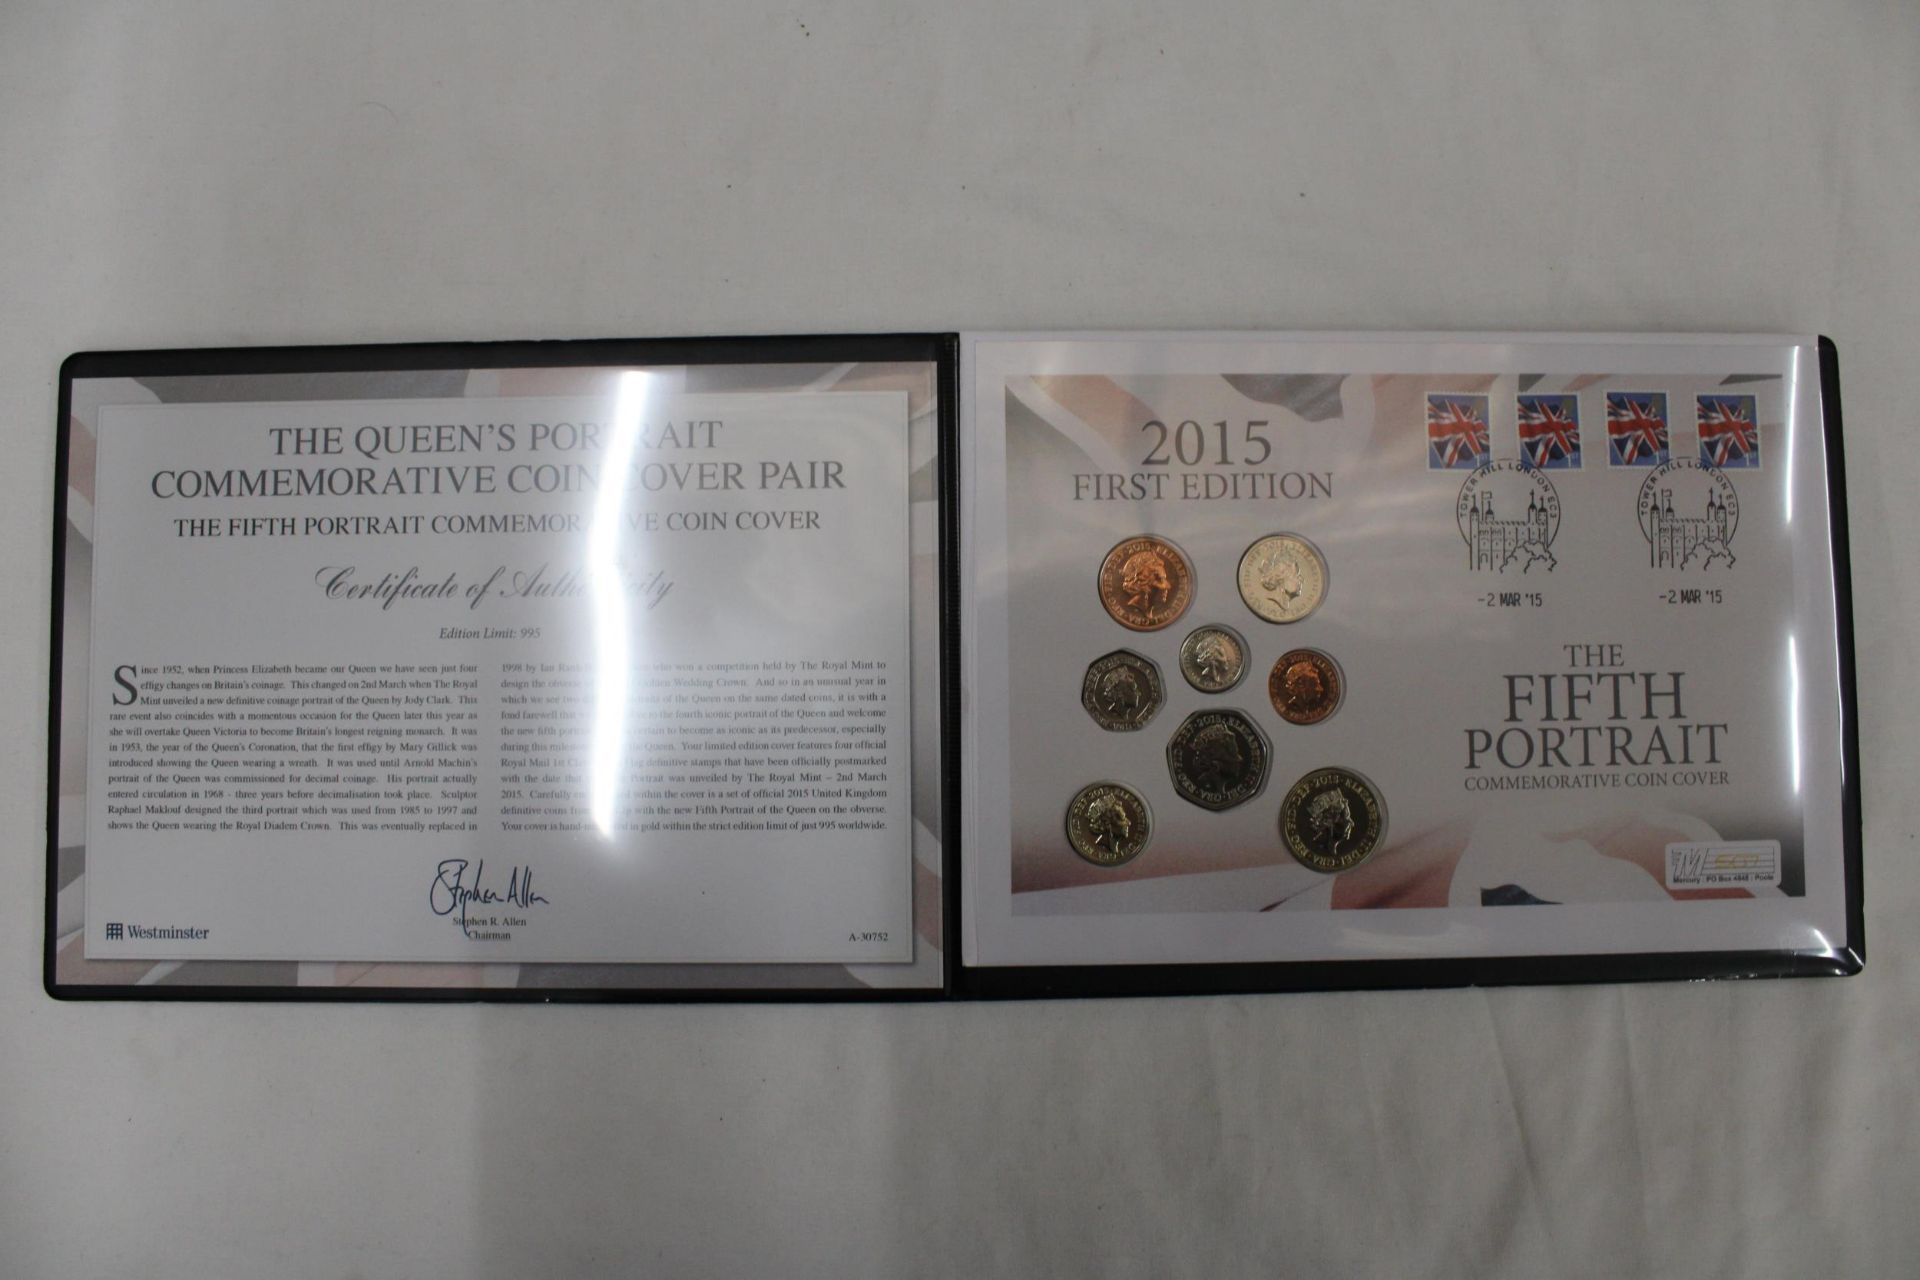 A 2015 FIRST EDITION FIFTH PORTRAIT COMMEMORATIVE COIN COVER WITH CERTIFICATE OF AUTHENTICITY